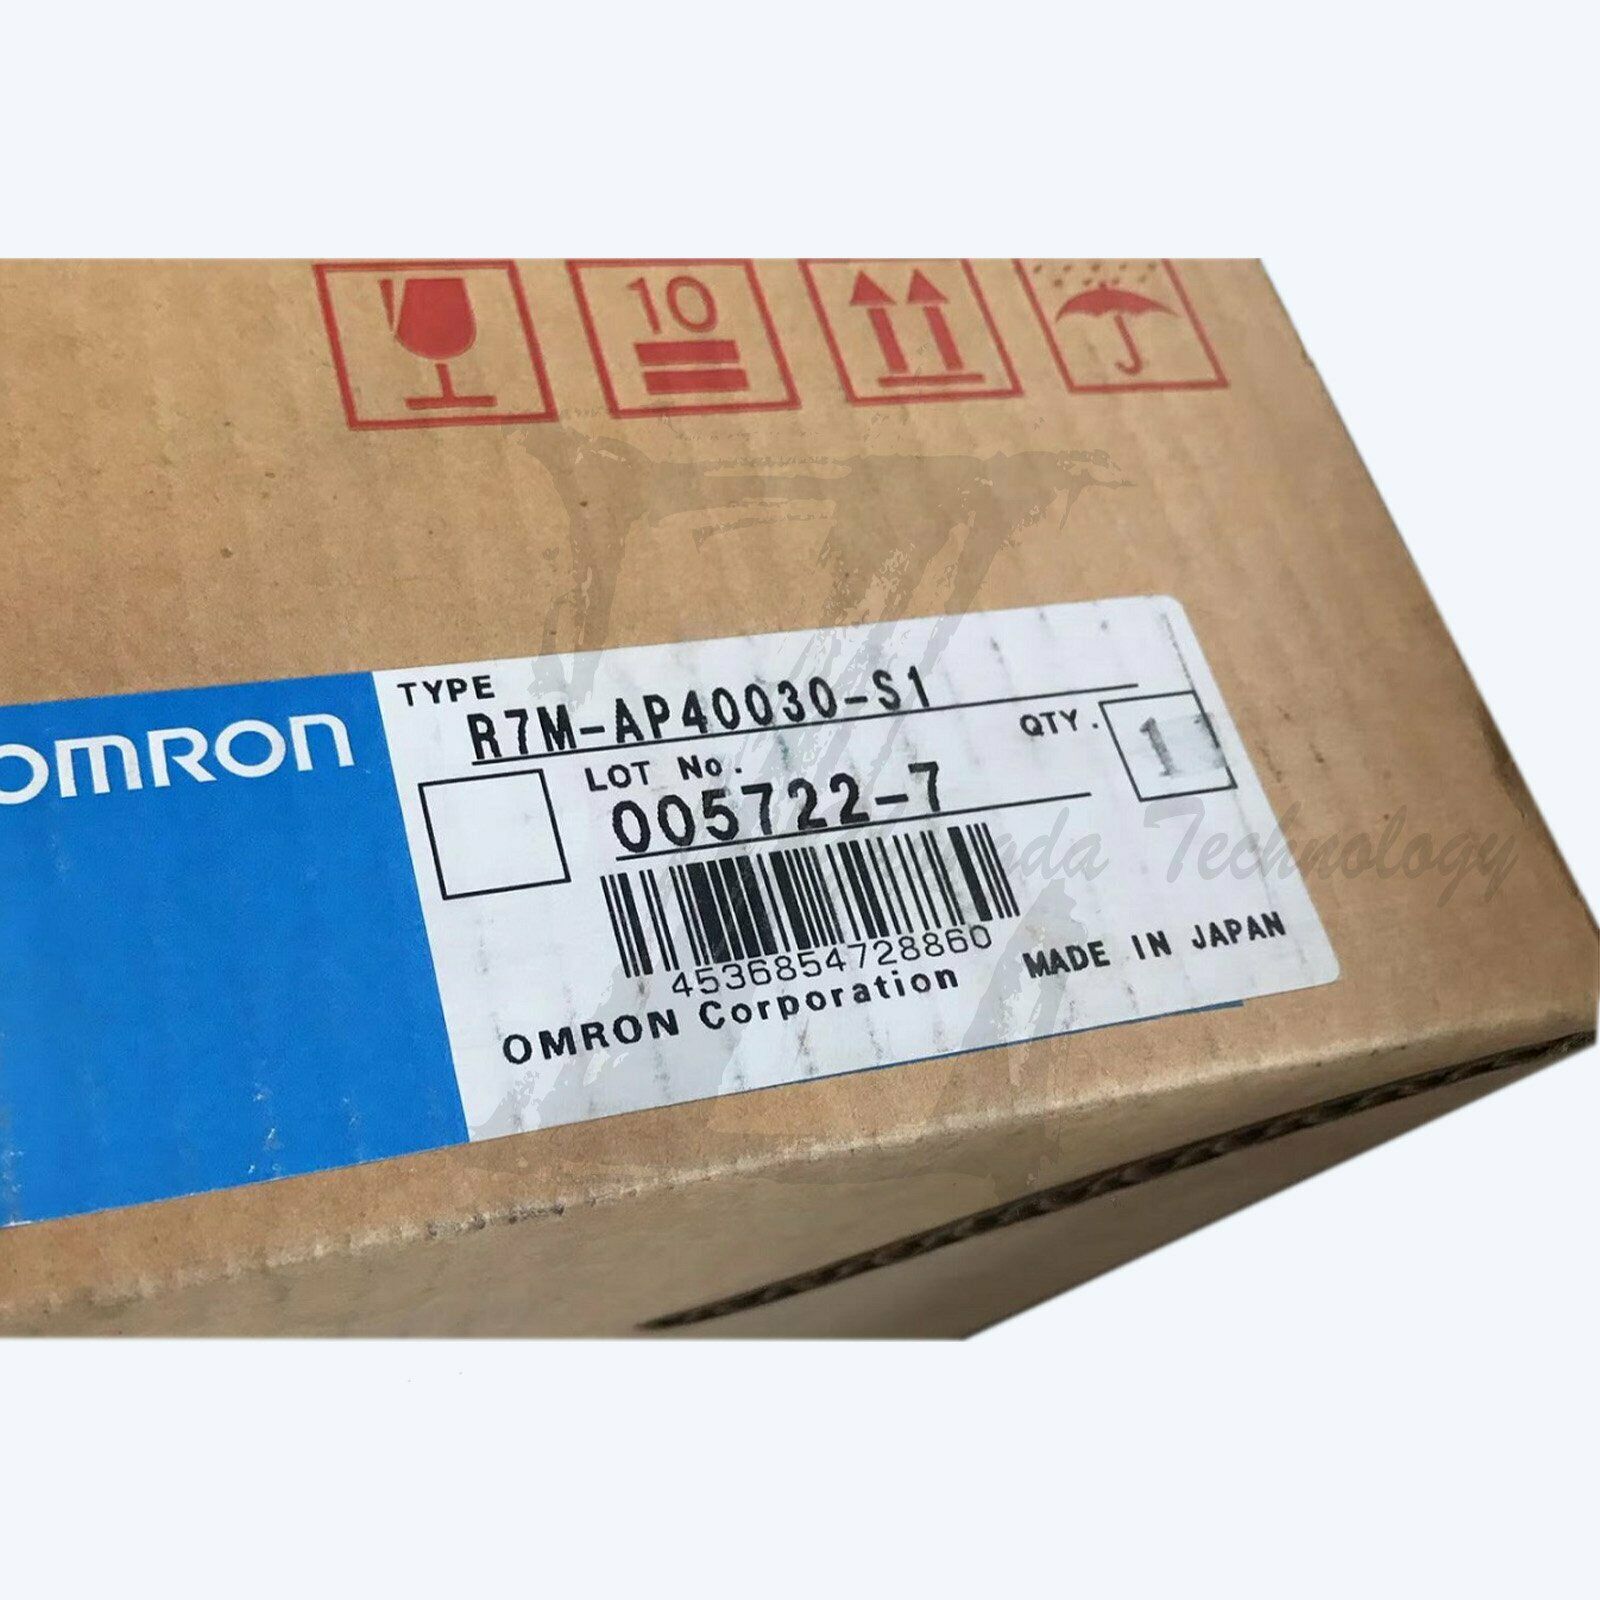 1PC new OMRON motor R7M-AP40030-S1 module one year warranty KOEED 500+, 80%, import_2020_10_10_031751, Omron, Other